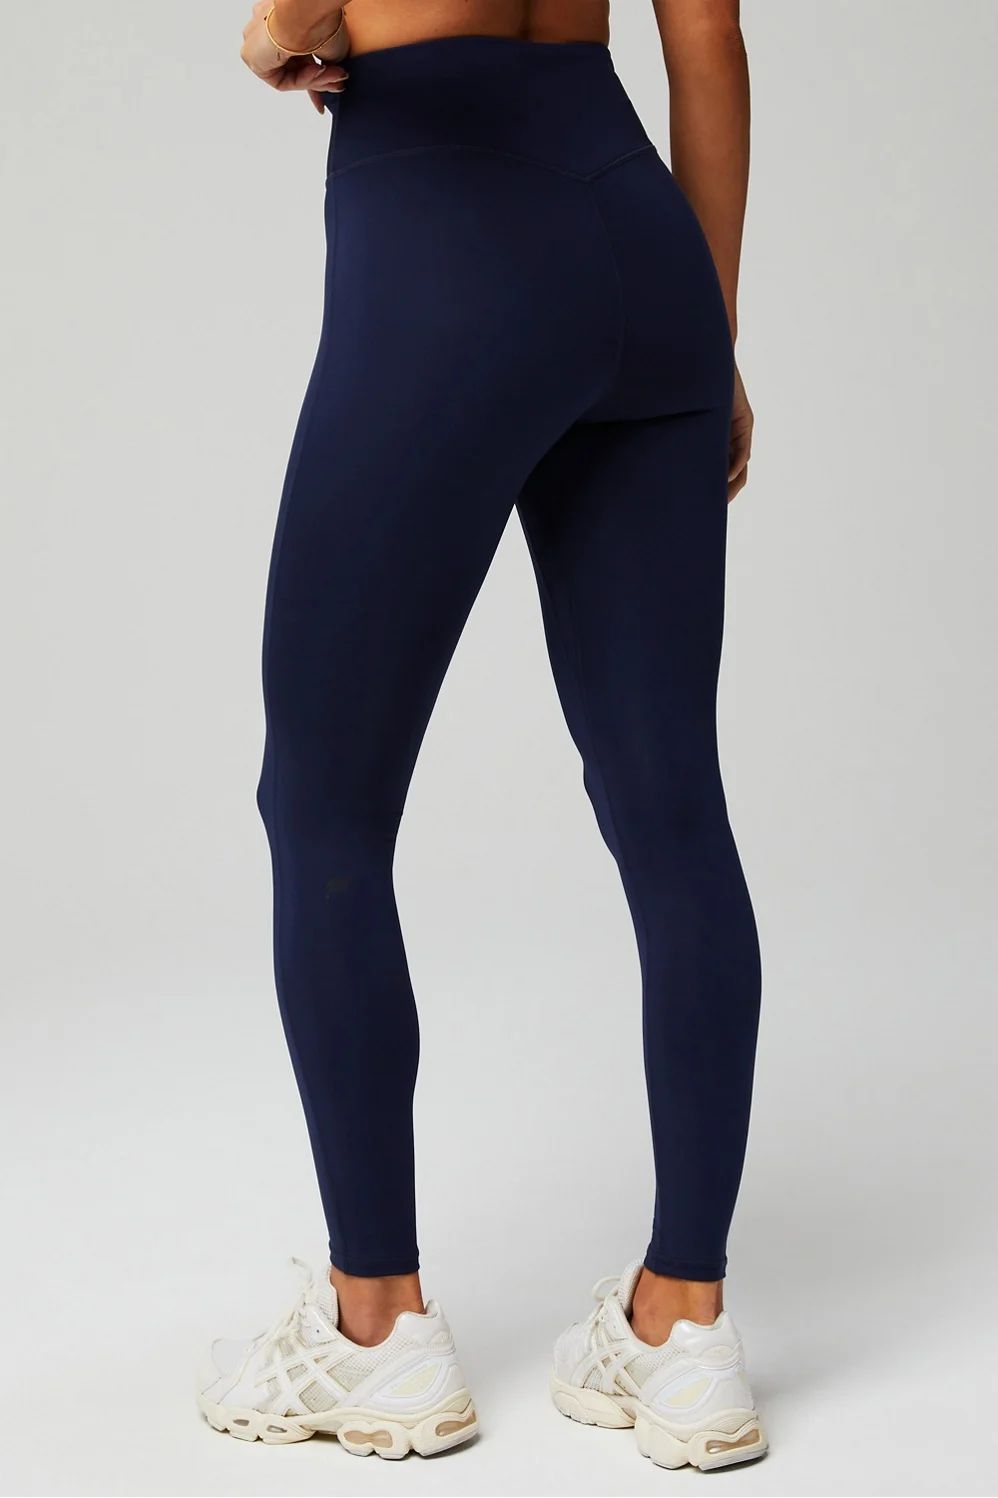 Anywhere Motion365+ High-Waisted Legging | Fabletics - North America